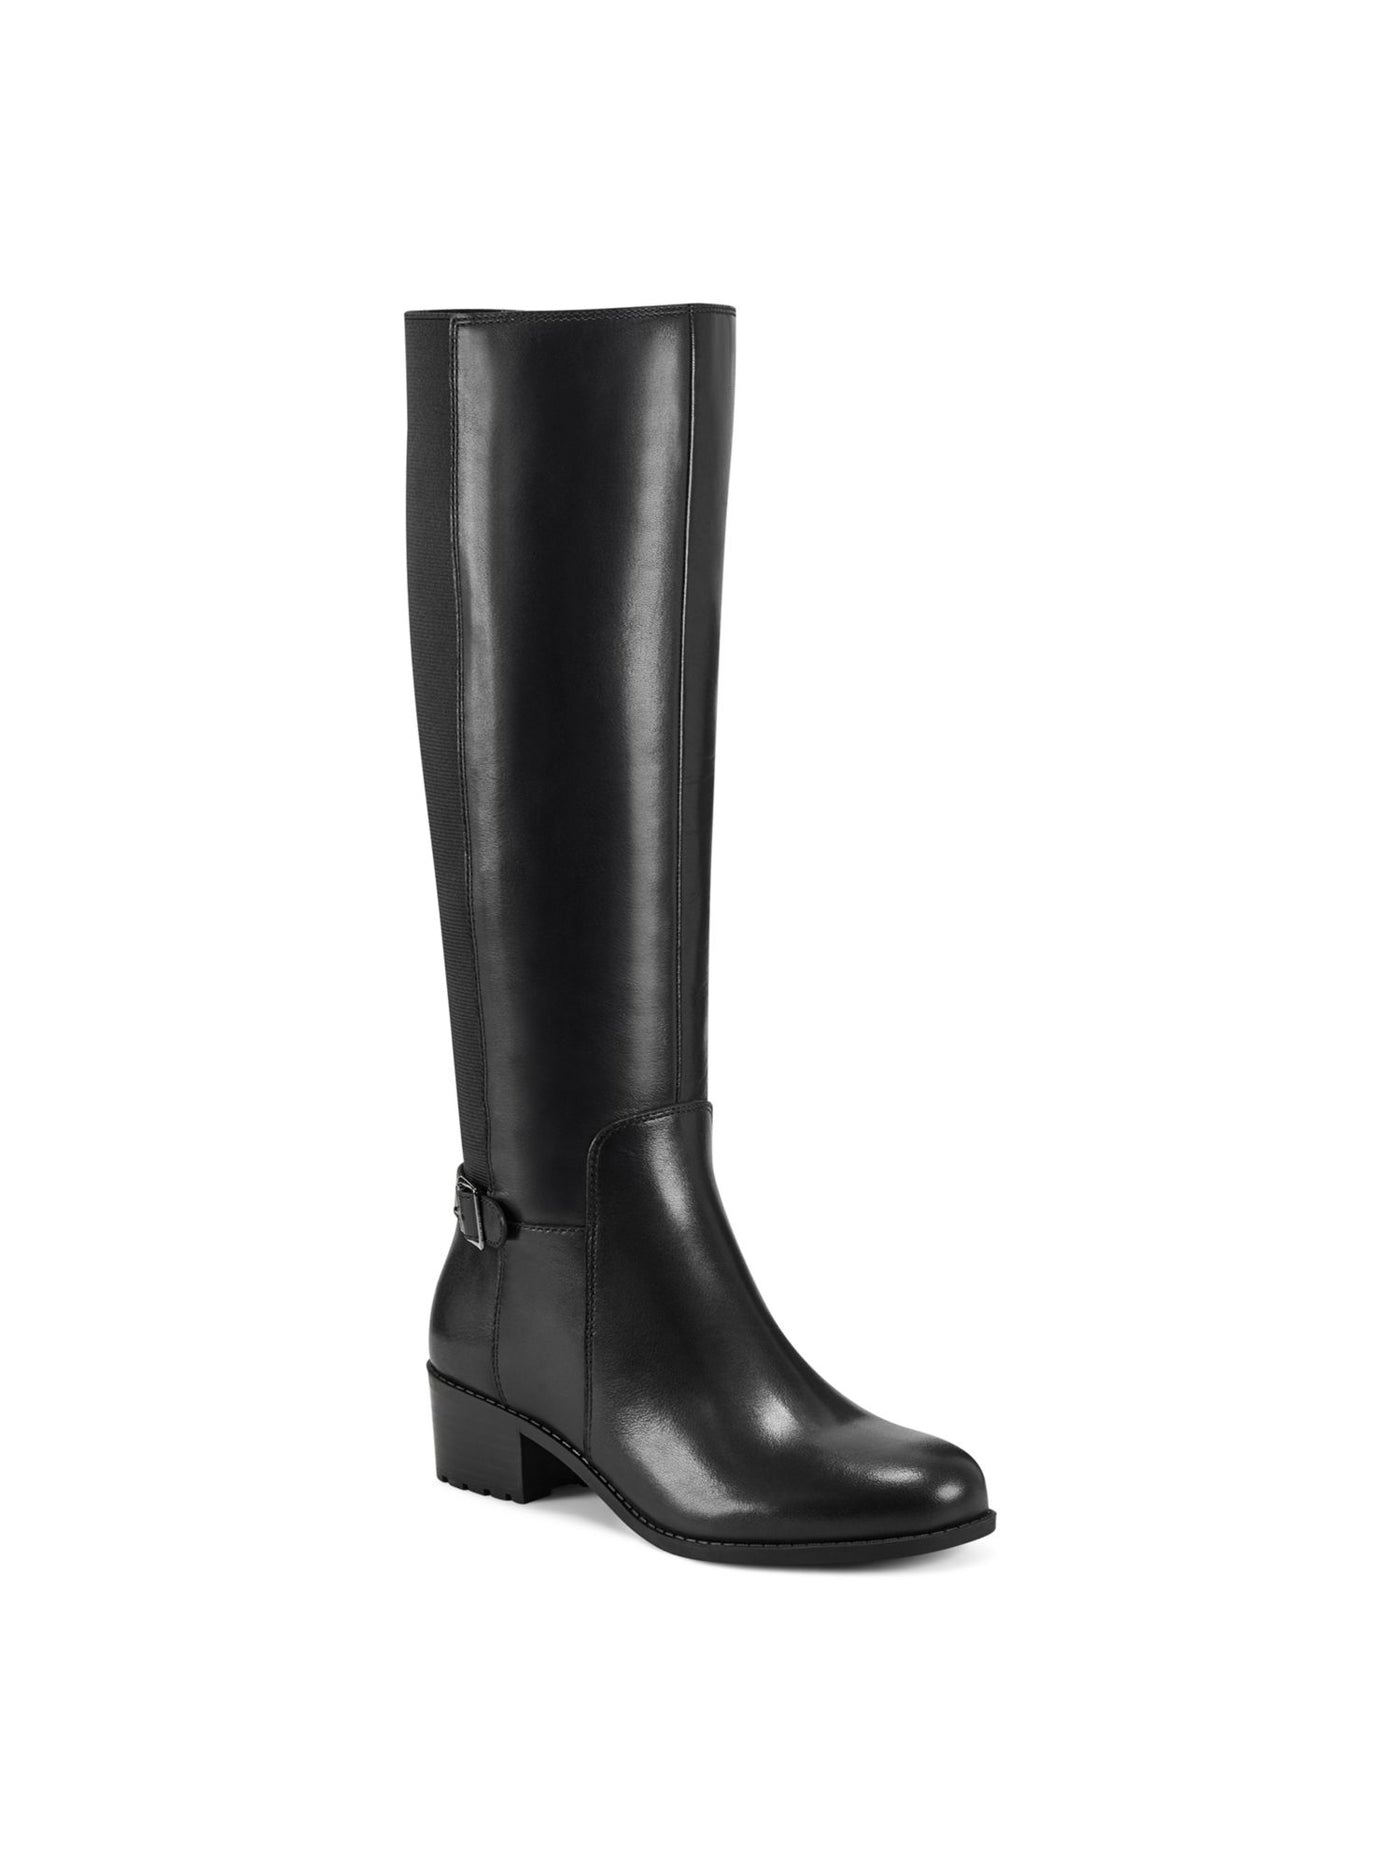 EASY SPIRIT Womens Black Cushioned Arch Support Chaza Round Toe Block Heel Riding Boot 6 M WC